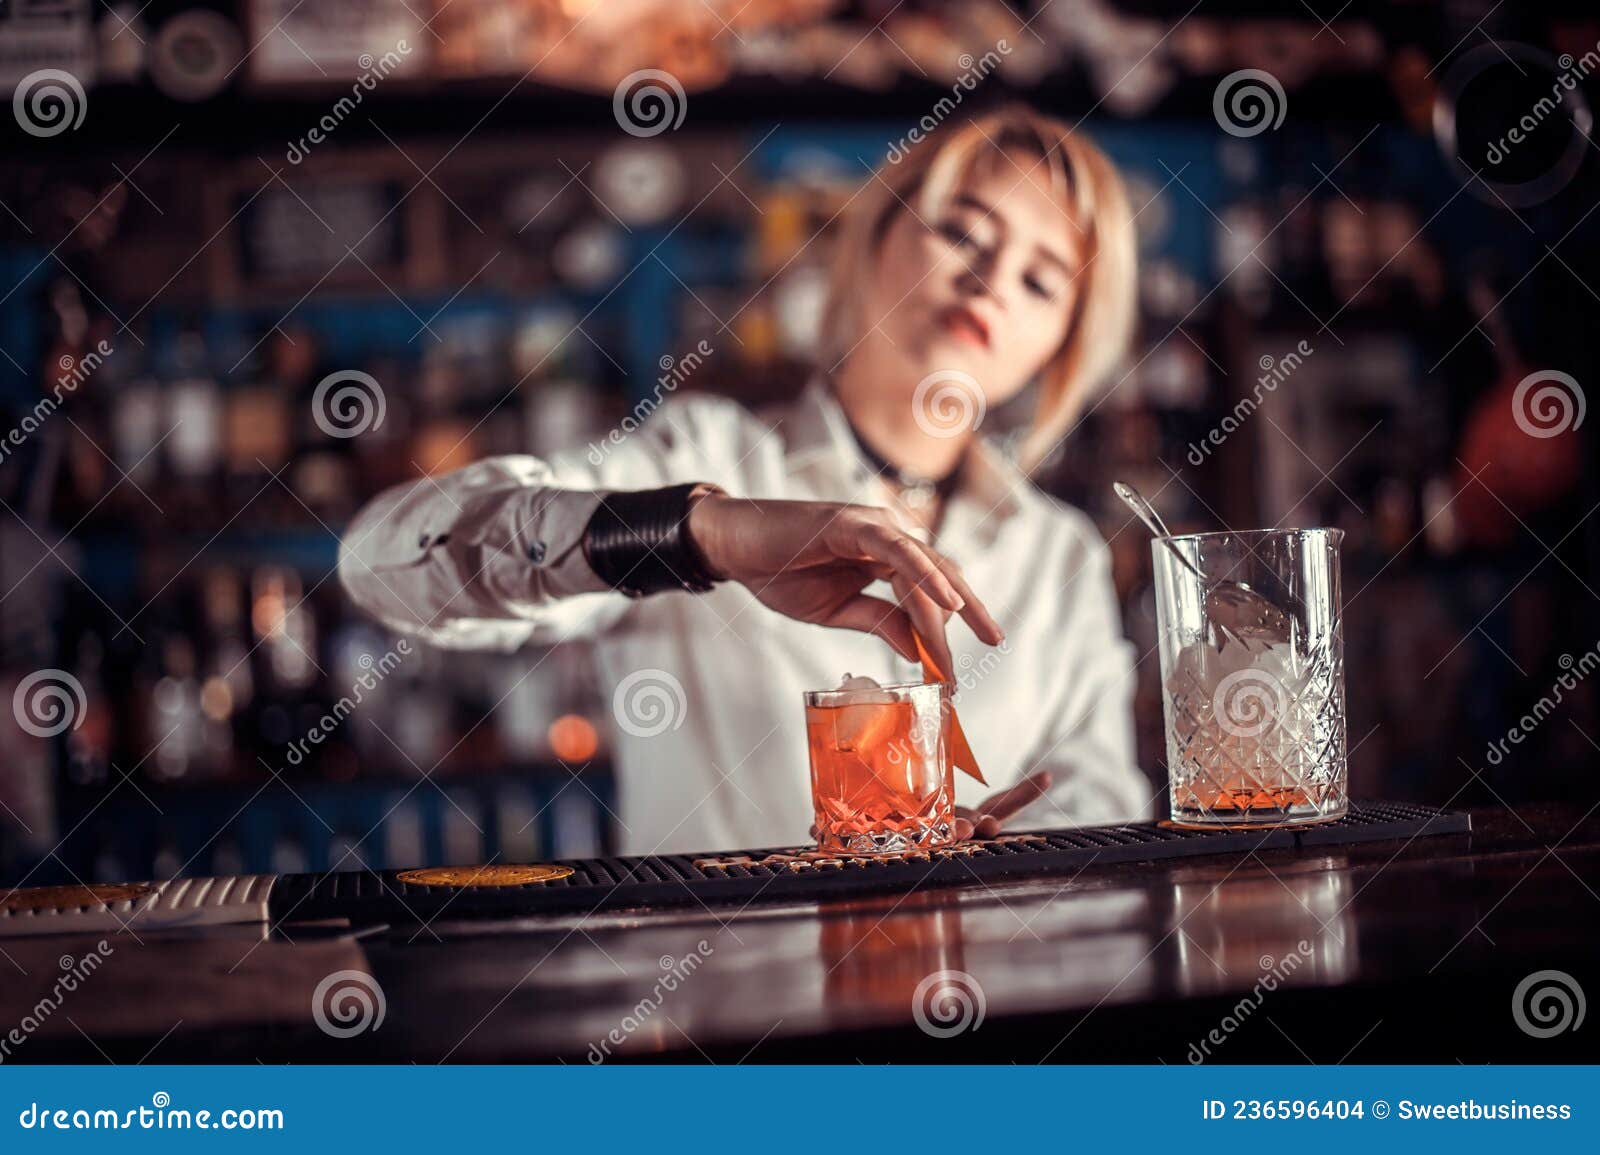 Professional Girl Bartender Decorates Colorful Concoction while ...